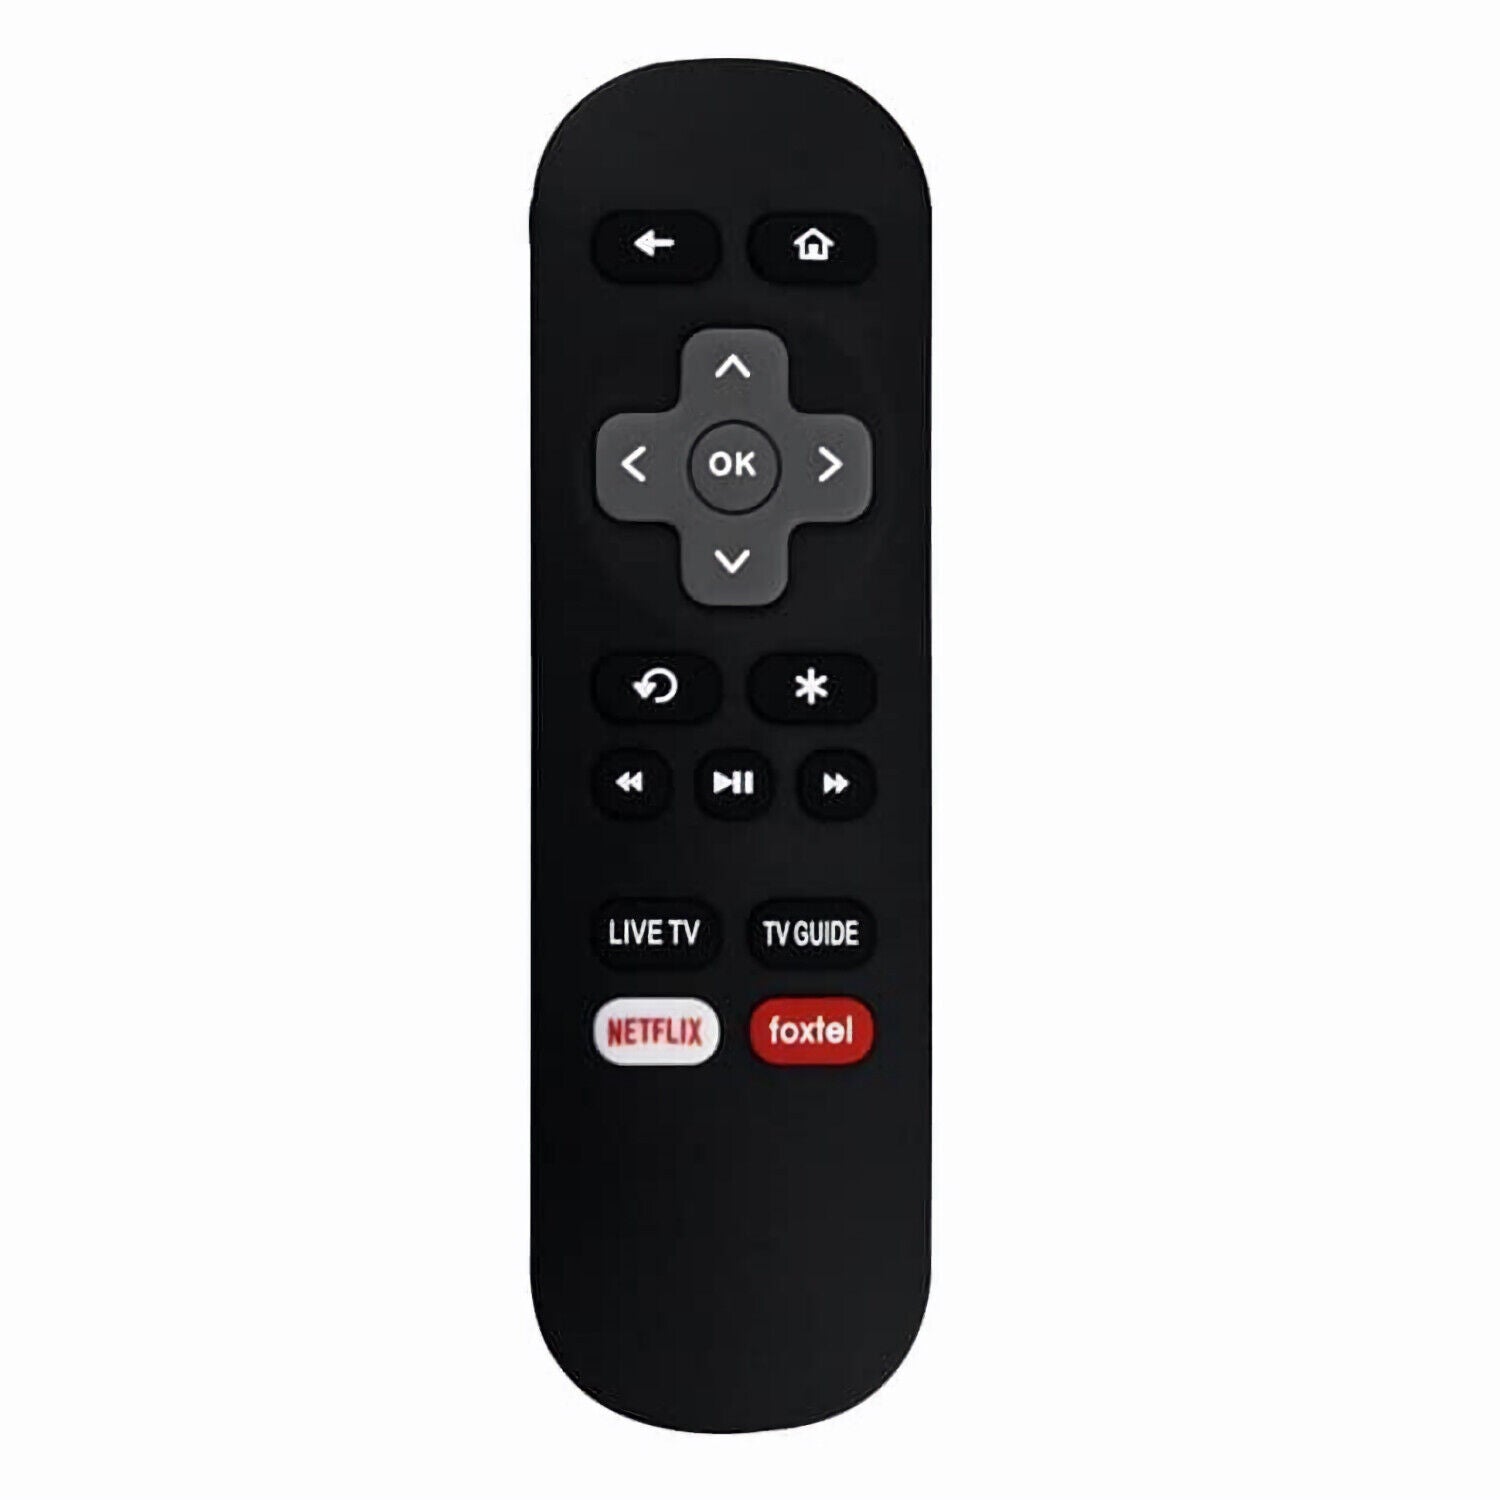 Replacement Remote Contro For Roku 7 6 5 4 3 2 1 Express Telstra TV With Netflix